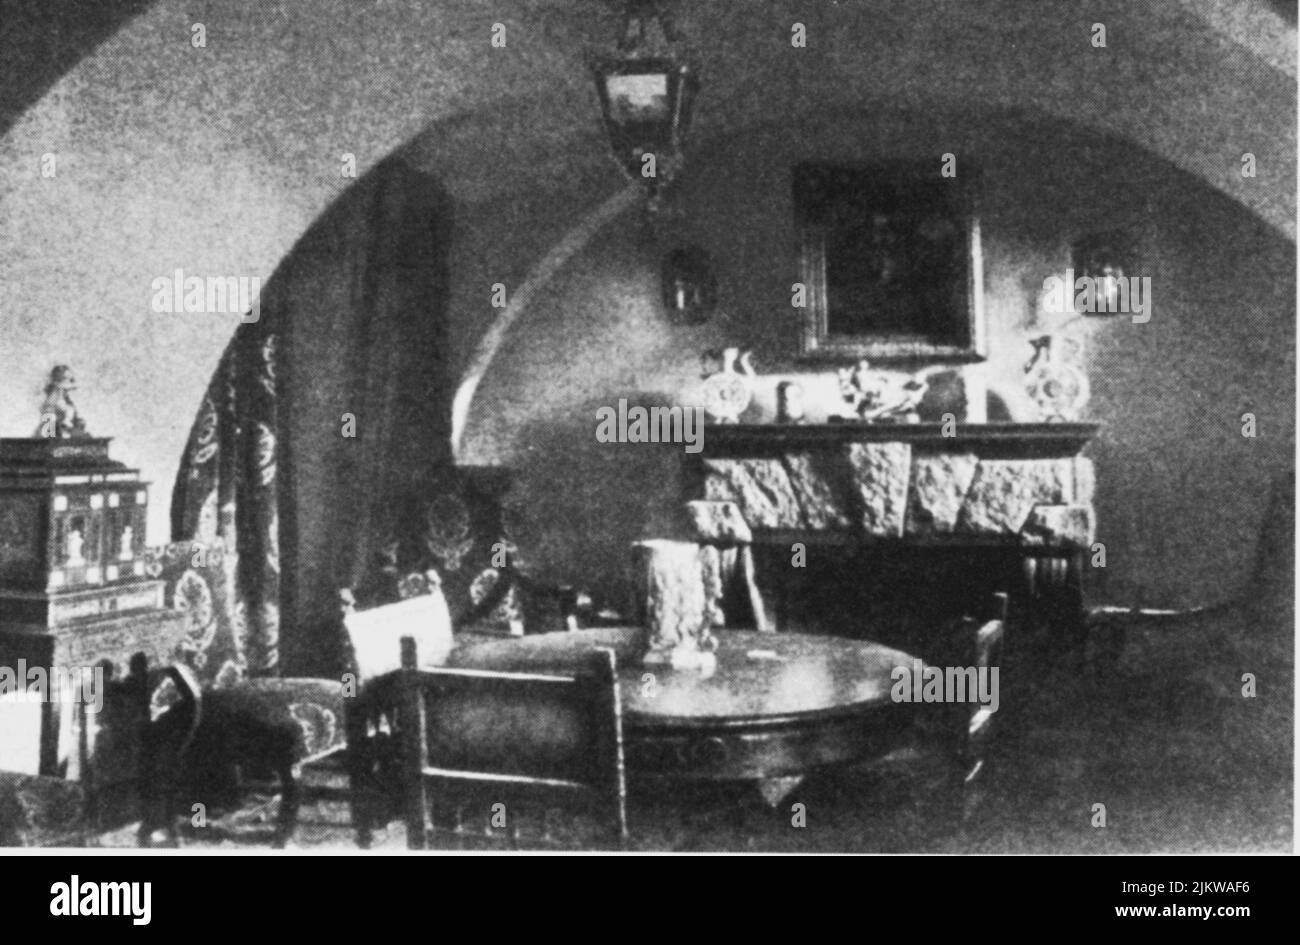 1916 , 16 december , Saint Petersburg , Russia : The murder cellar in the Moika Palace by Youssoupov family , whom the  celebrated russian priest Grigorij Efimovic RASPUTIN ( 1871 - 1916 ) was  killed by prince Felix Youssoupov and others conspirators   -   - RASPOUTINE  - assasination - delitto ----  Archivio GBB Stock Photo